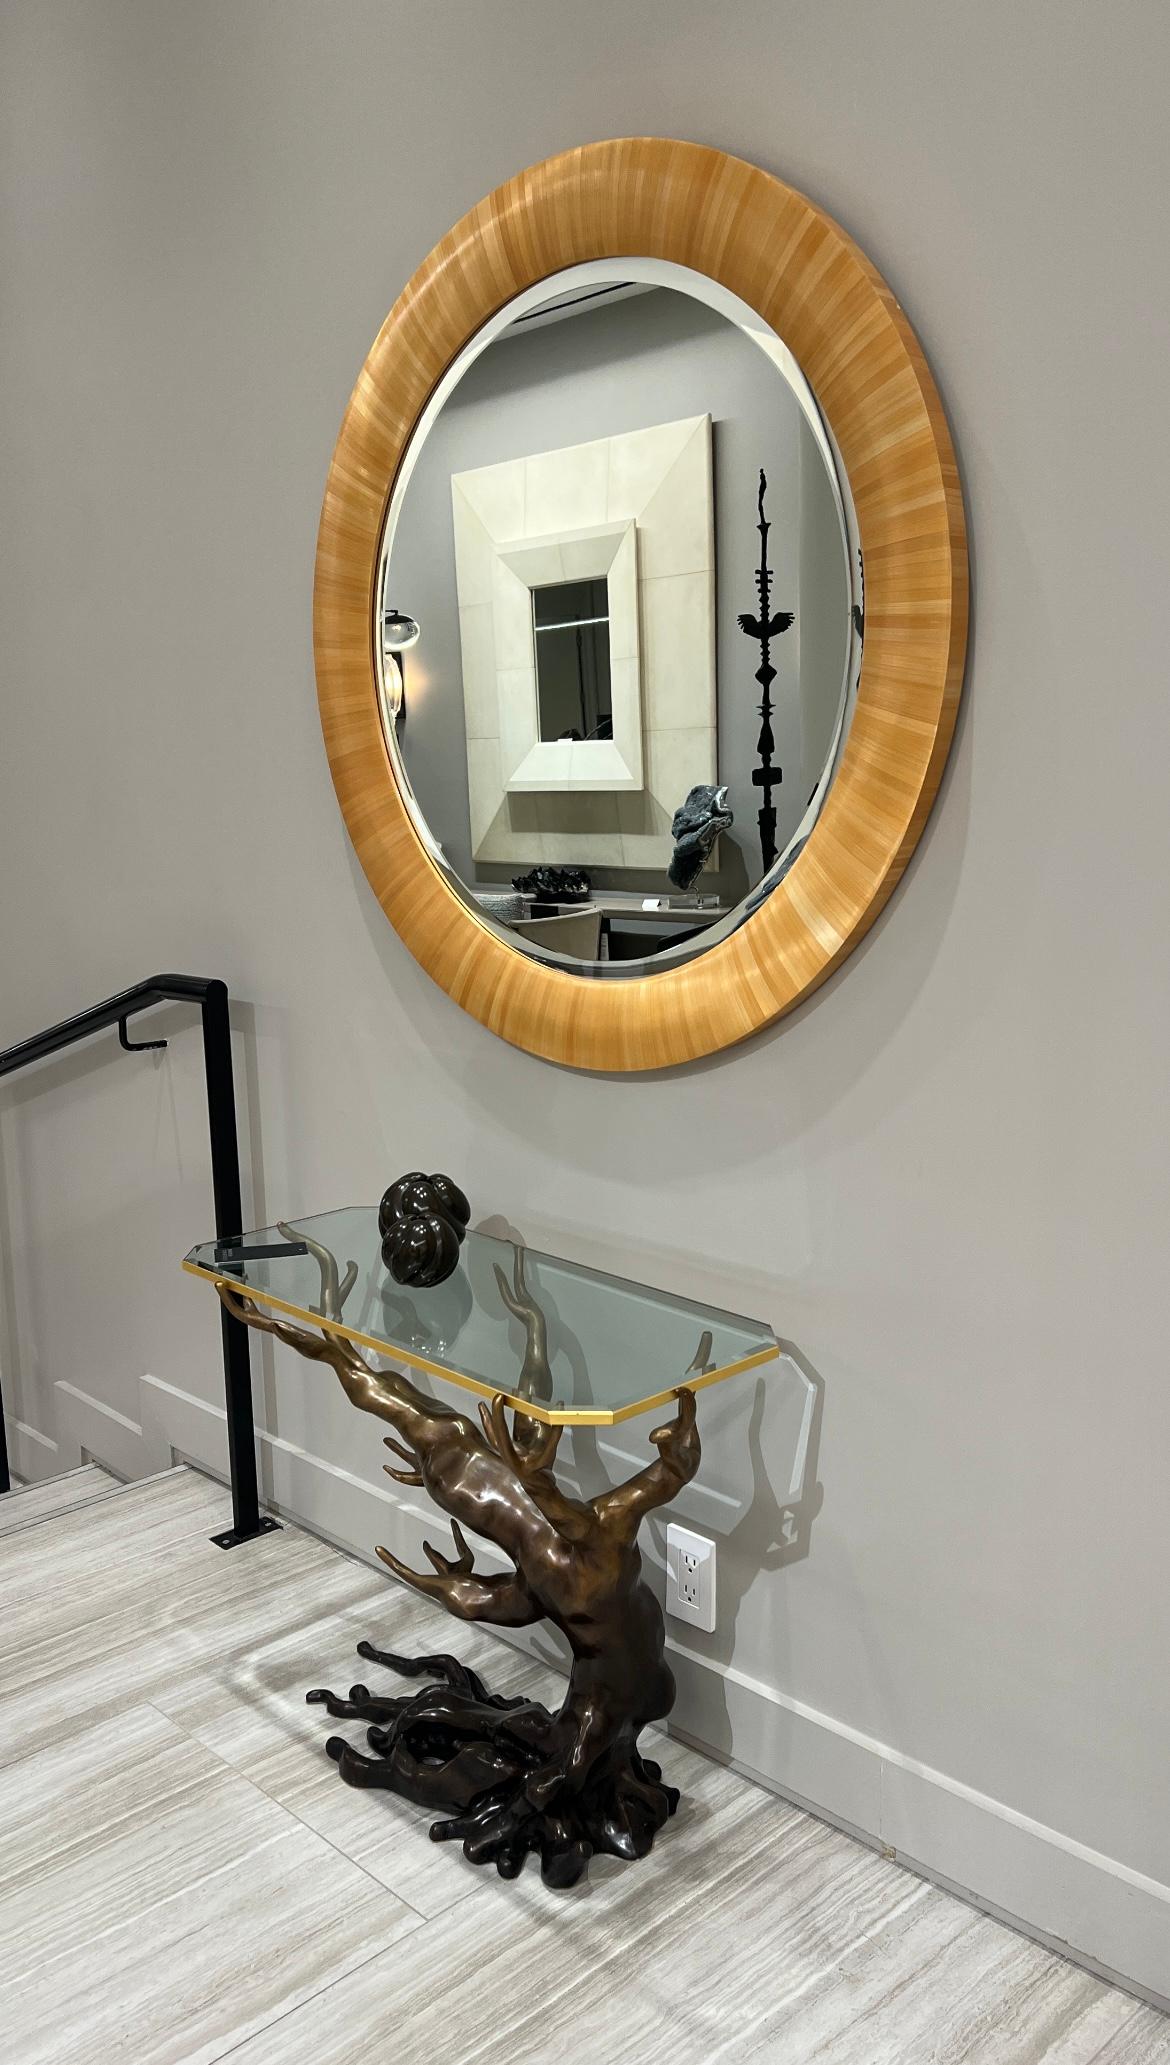 Circular wall mirror with hand laid straw marquetry frame. It is real straw marquetry, not wood veneer.

Dimensions/
dia 41.3 x h 1.4 in
dia 105 x h 3.5 cm

Additional straw colors are available, as shown in photos.

24 weeks lead time.